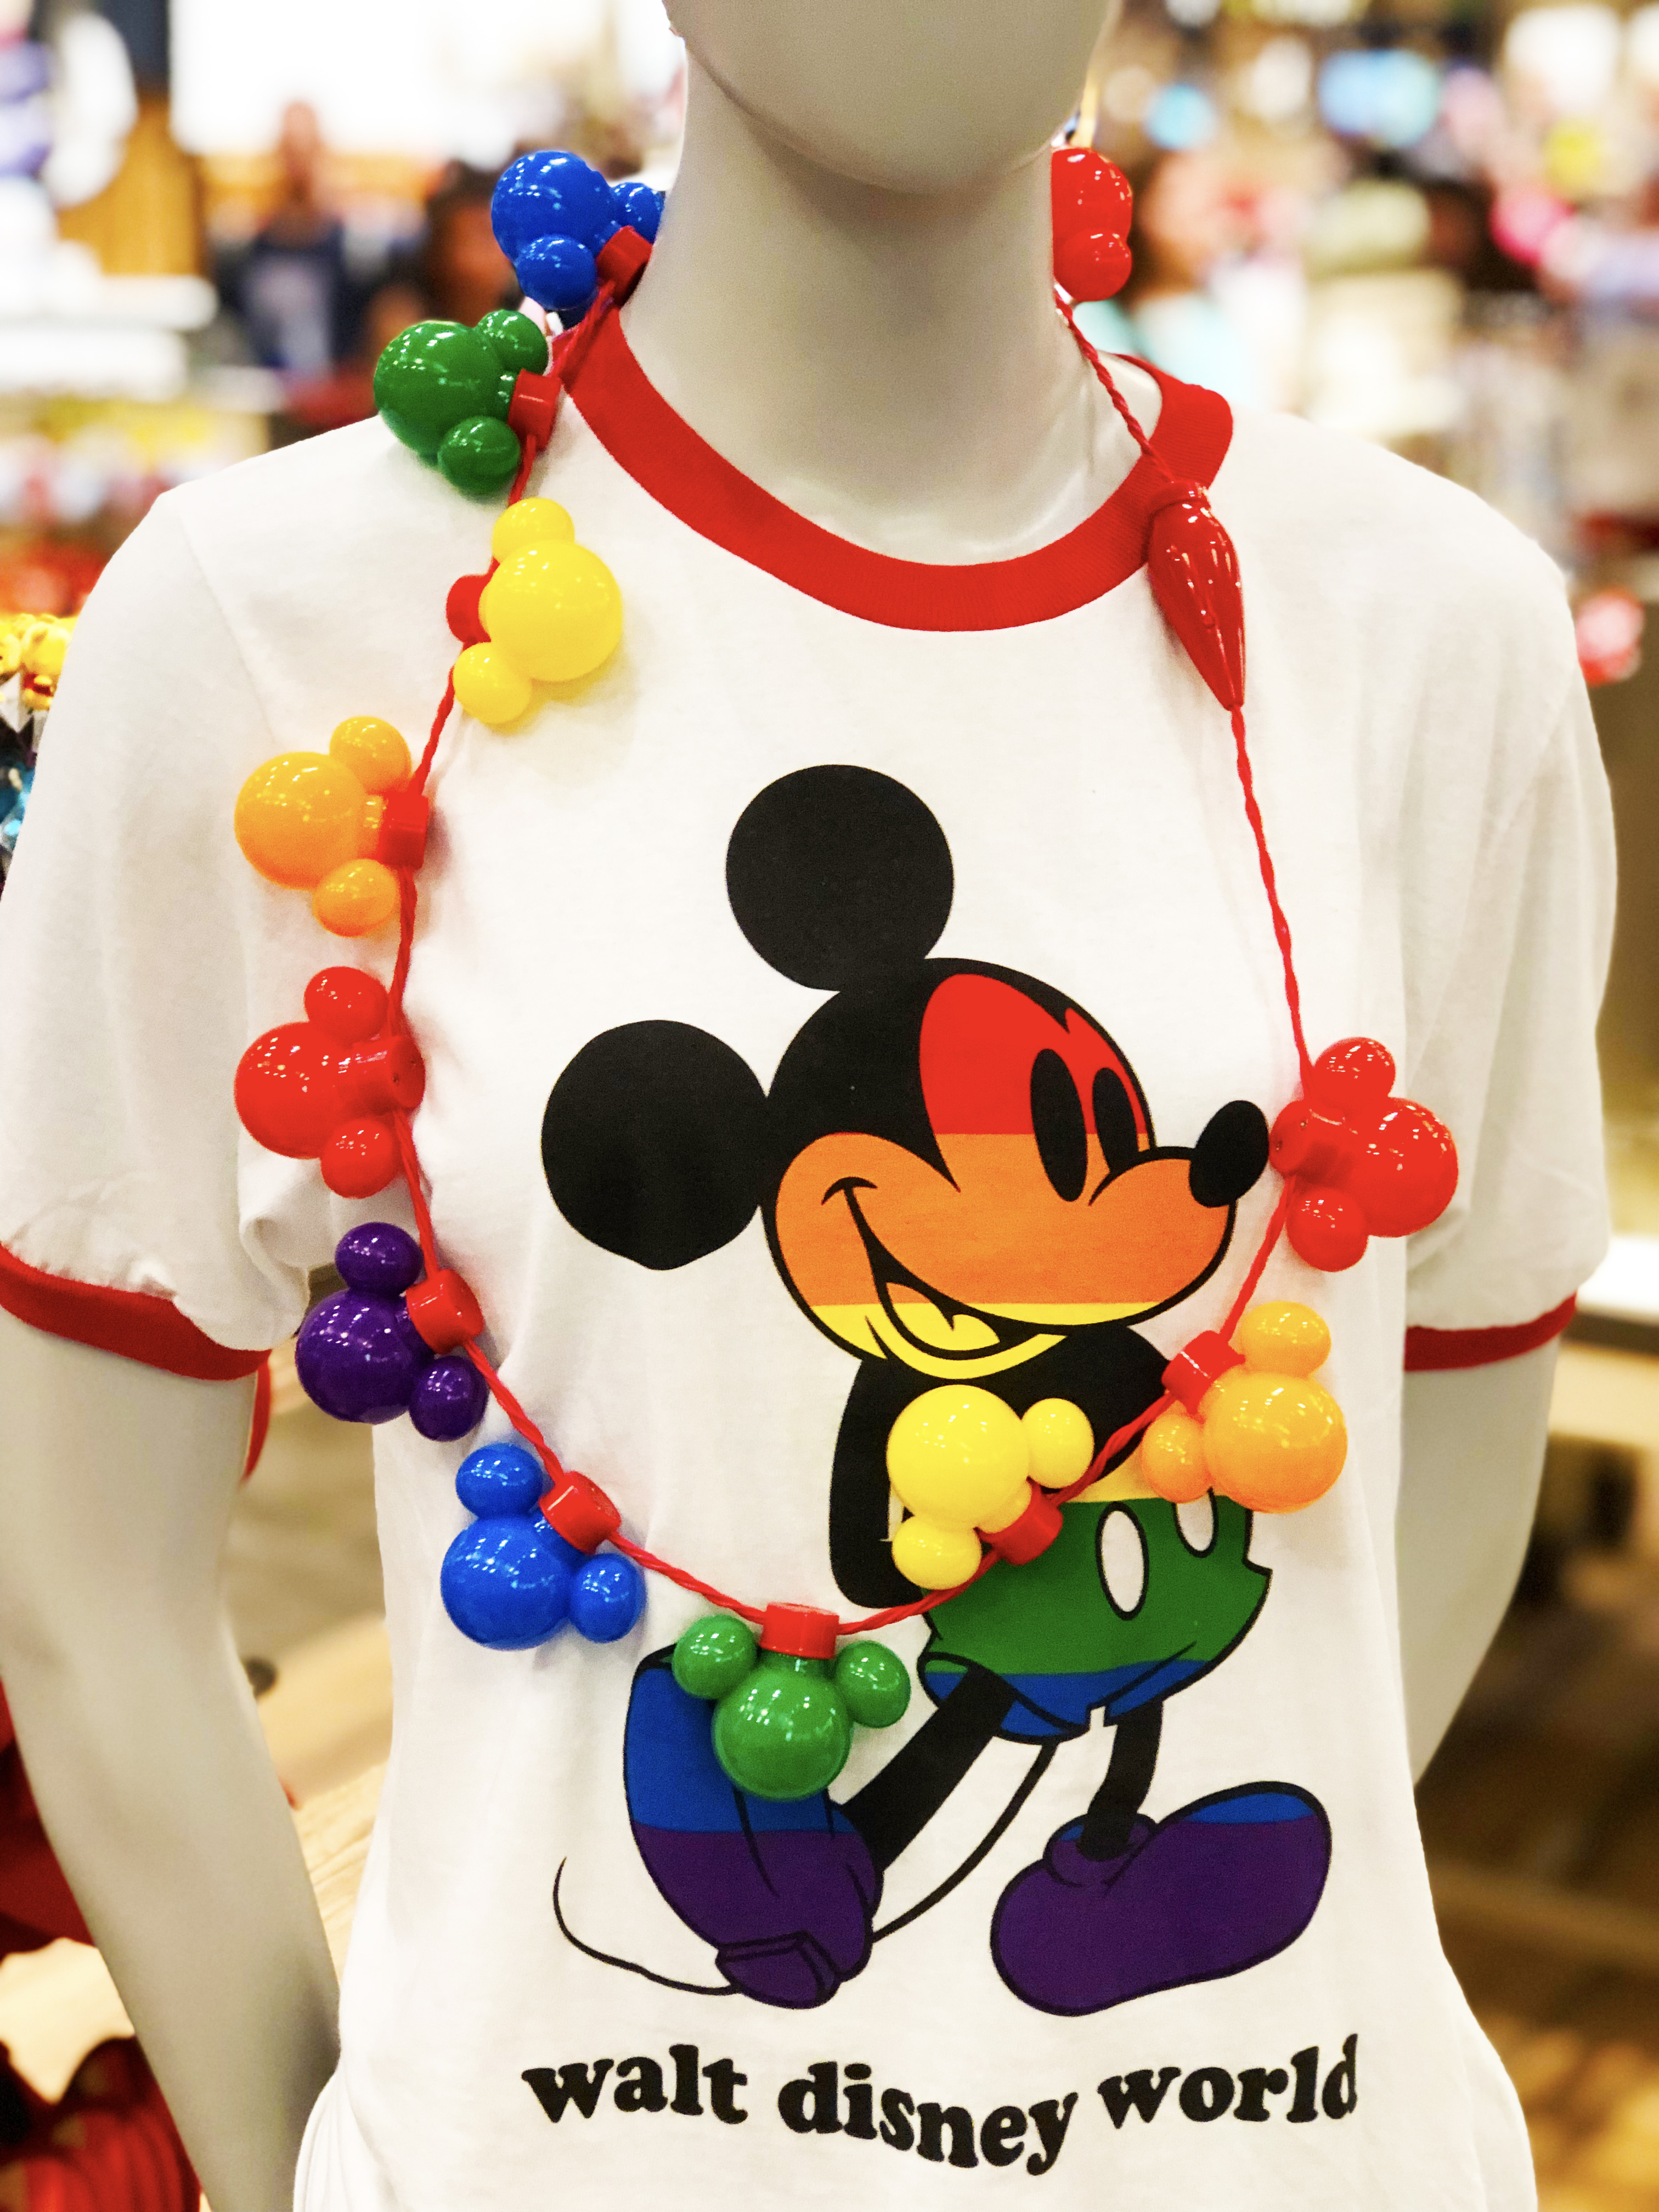 Mannequin decorated in light-up necklace with light-up Mickey heads that are each a different color to represent the rainbow on a red wire string. Mannequin is wearing the white tee with the classic Mickey sticking out his foot with his arms crossed behind his back (Mickey is rainbow-striped in the order from top to bottom of red, orange, yellow, green, blue, purple). Rounded collar and cut-off for the sleeves on the tee are red.